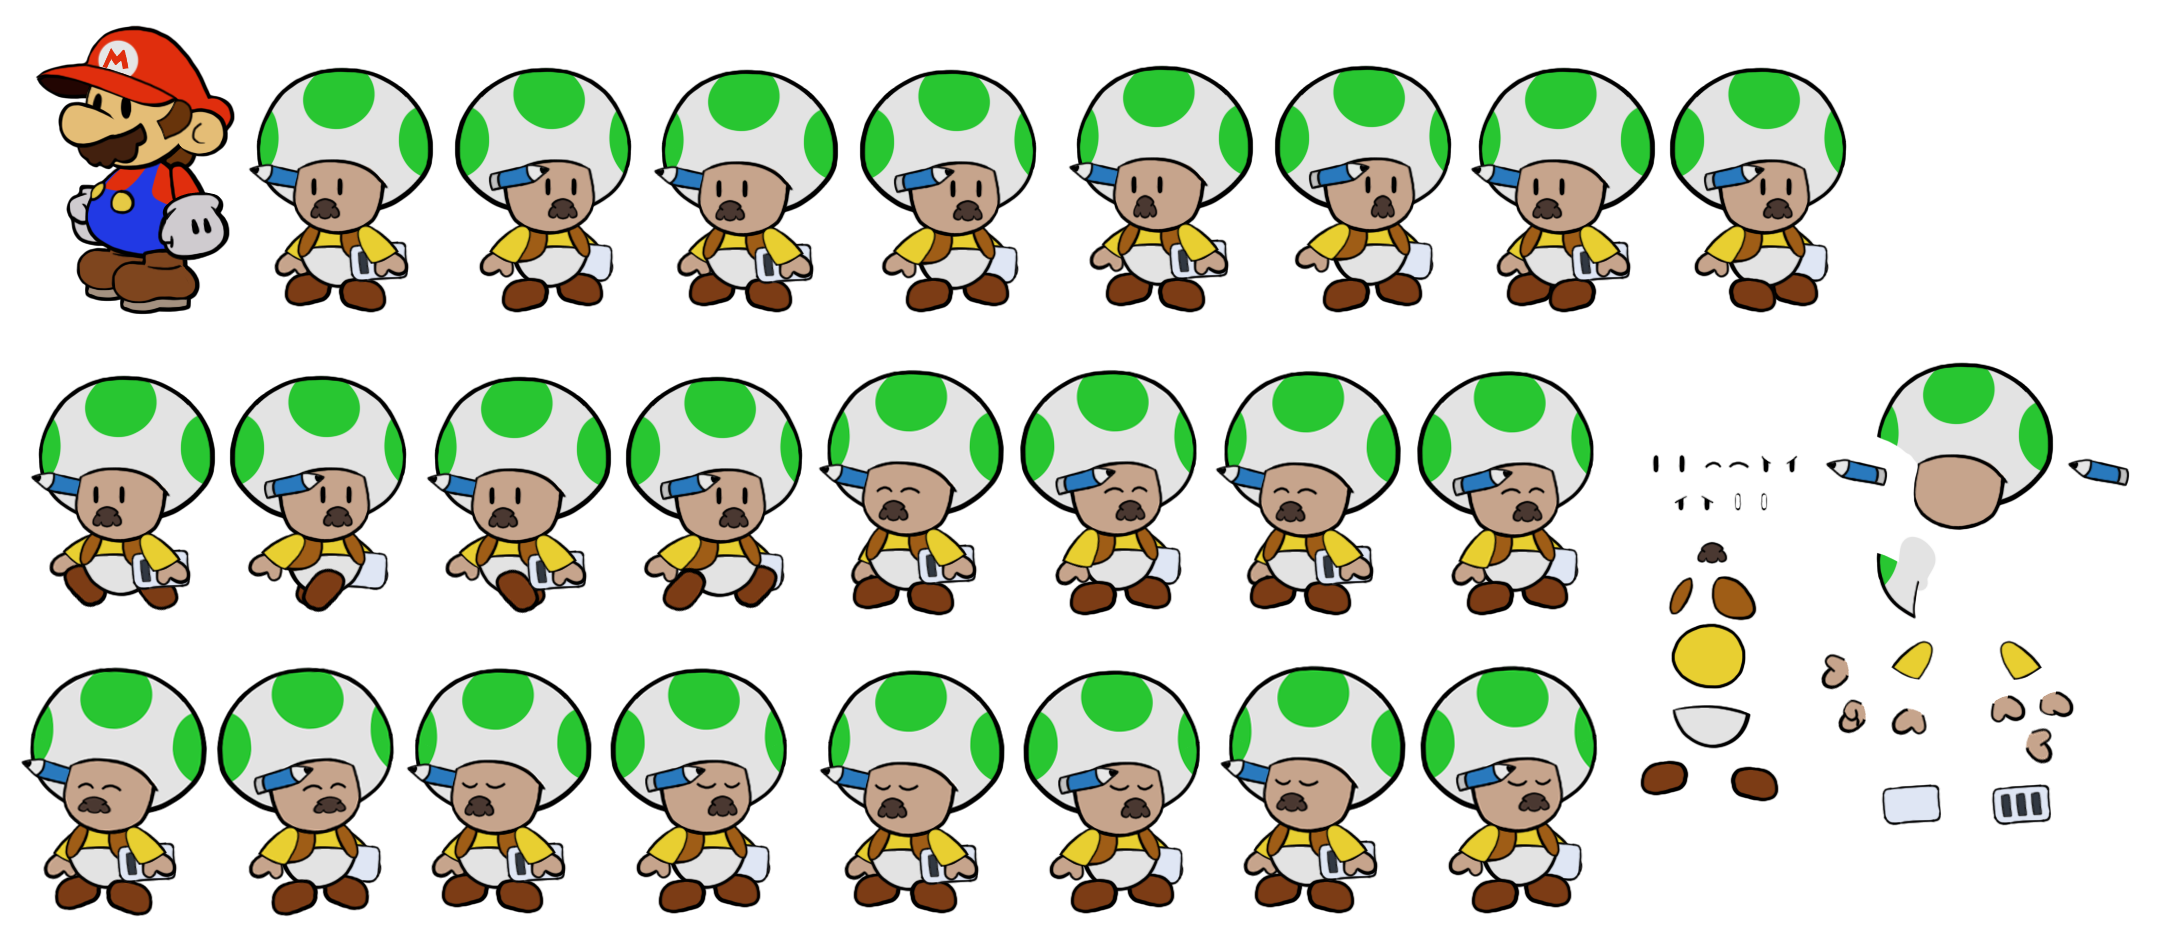 Shop Toads (The Thousand-Year Door, Paper Mario-Style)